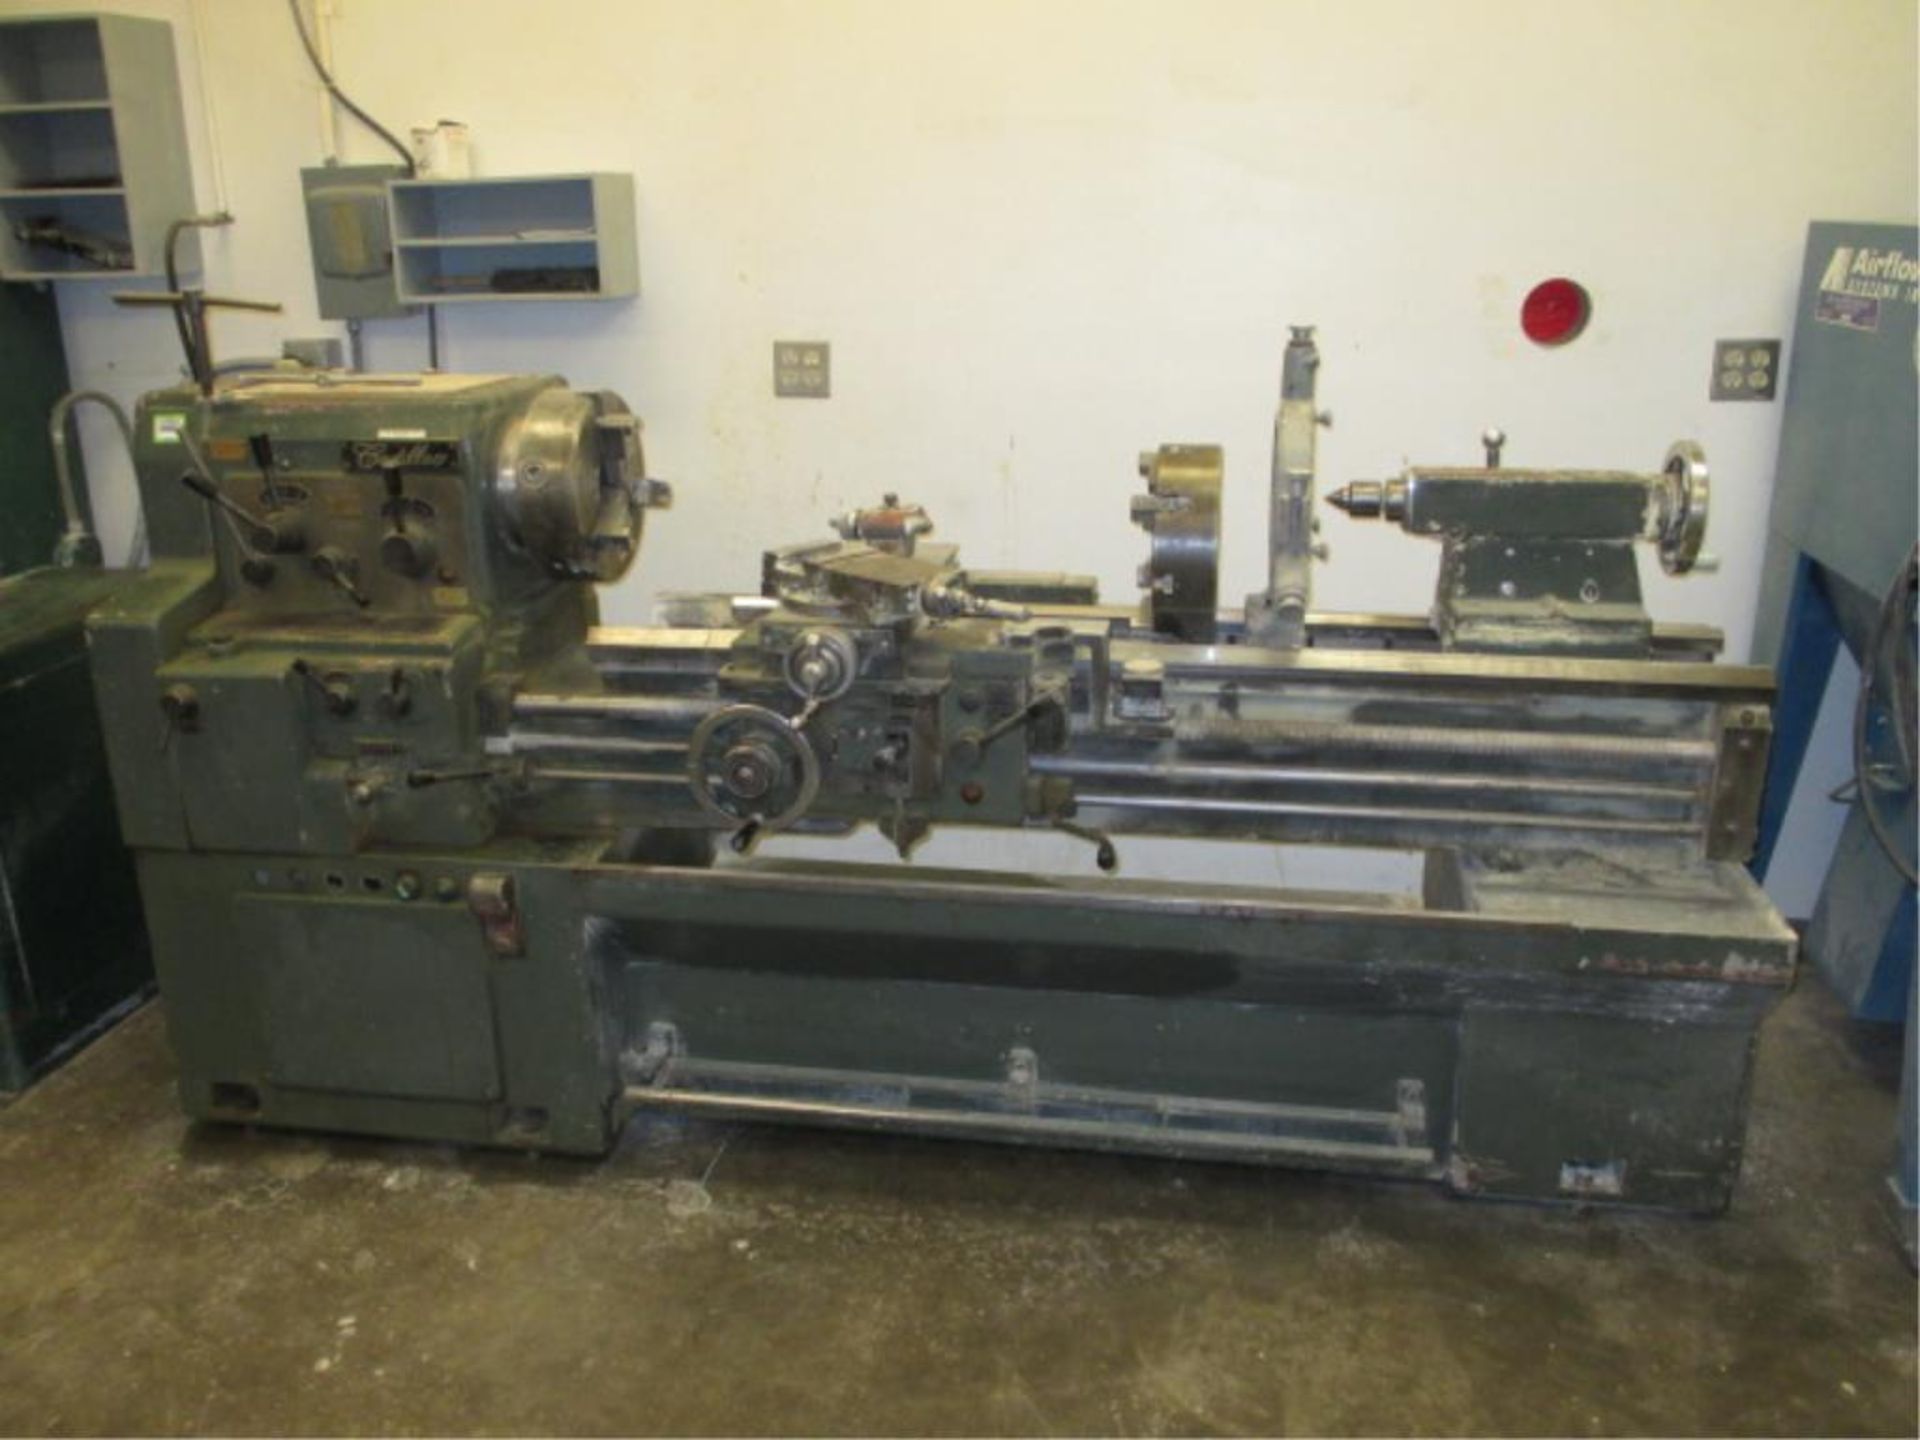 Lathe. Cadillac 1749G Engine Lathe with 12" 3-Jaw Chuck, 2 1/8" Spindle Bore, 12" 4-Jaw Chuck,